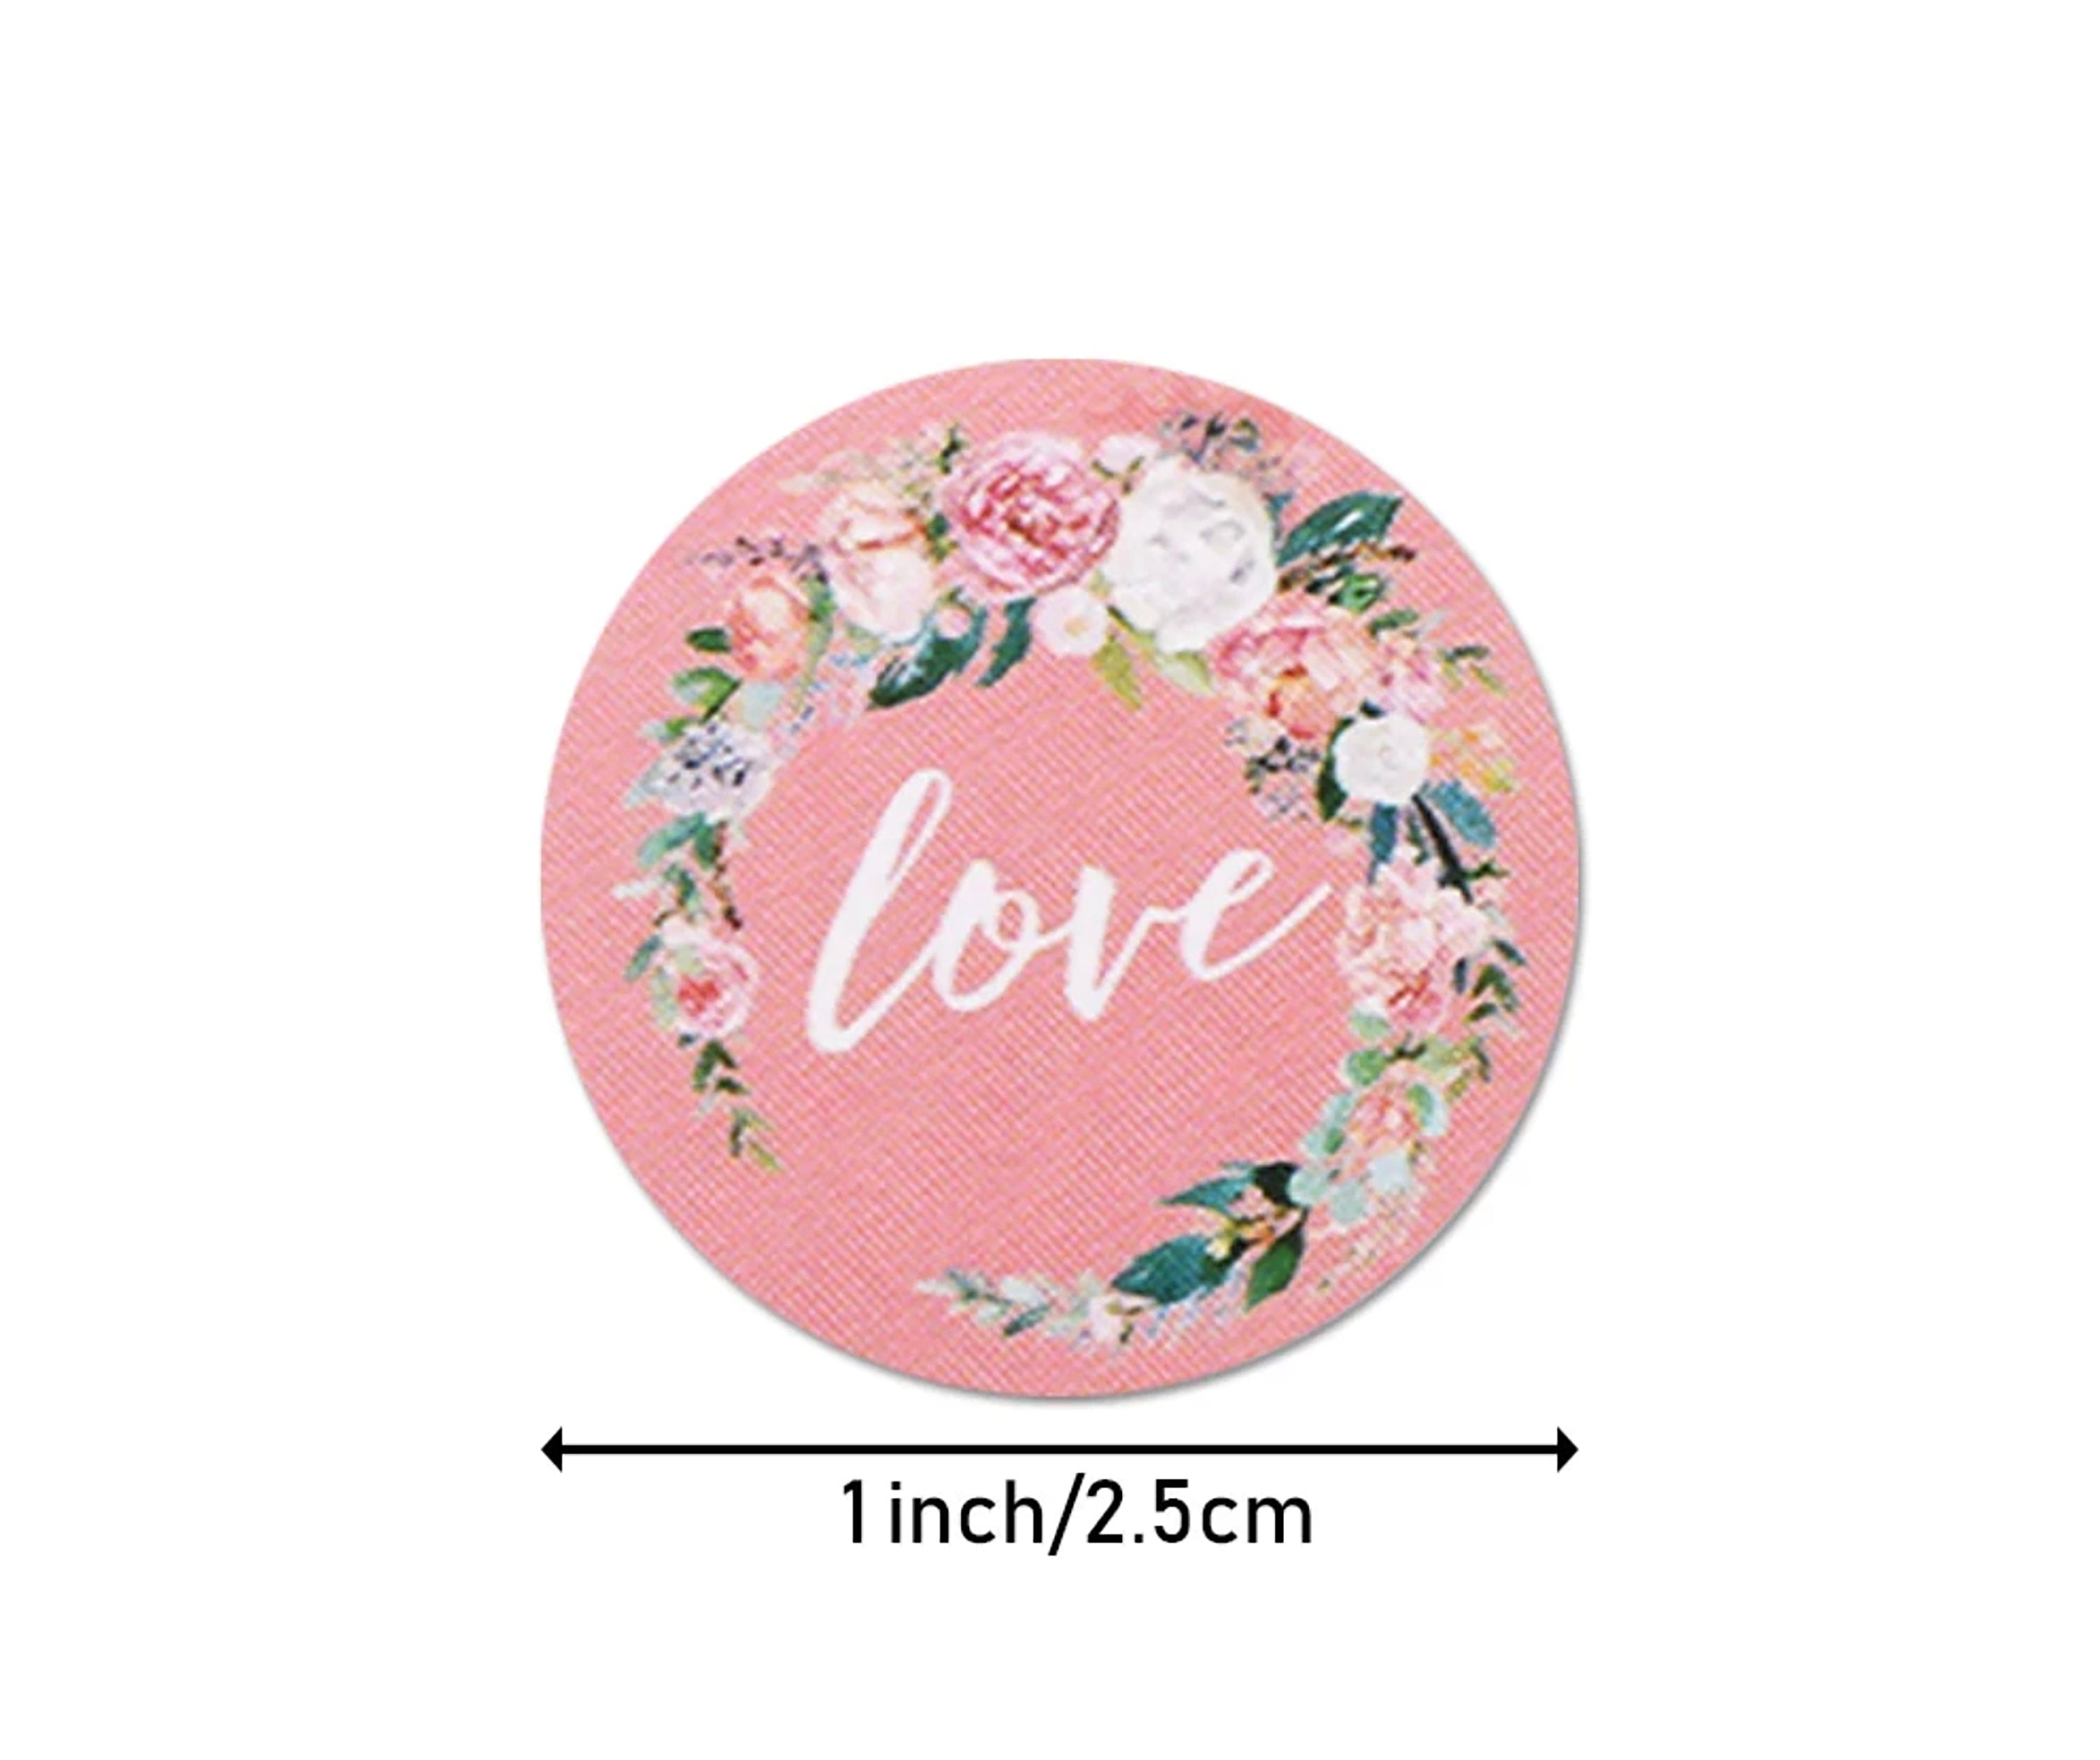 1 Roll (Approx 500pcs / roll ), 25mm, Round Self Adhesive Thank You Sticker in White and Pastel Floral